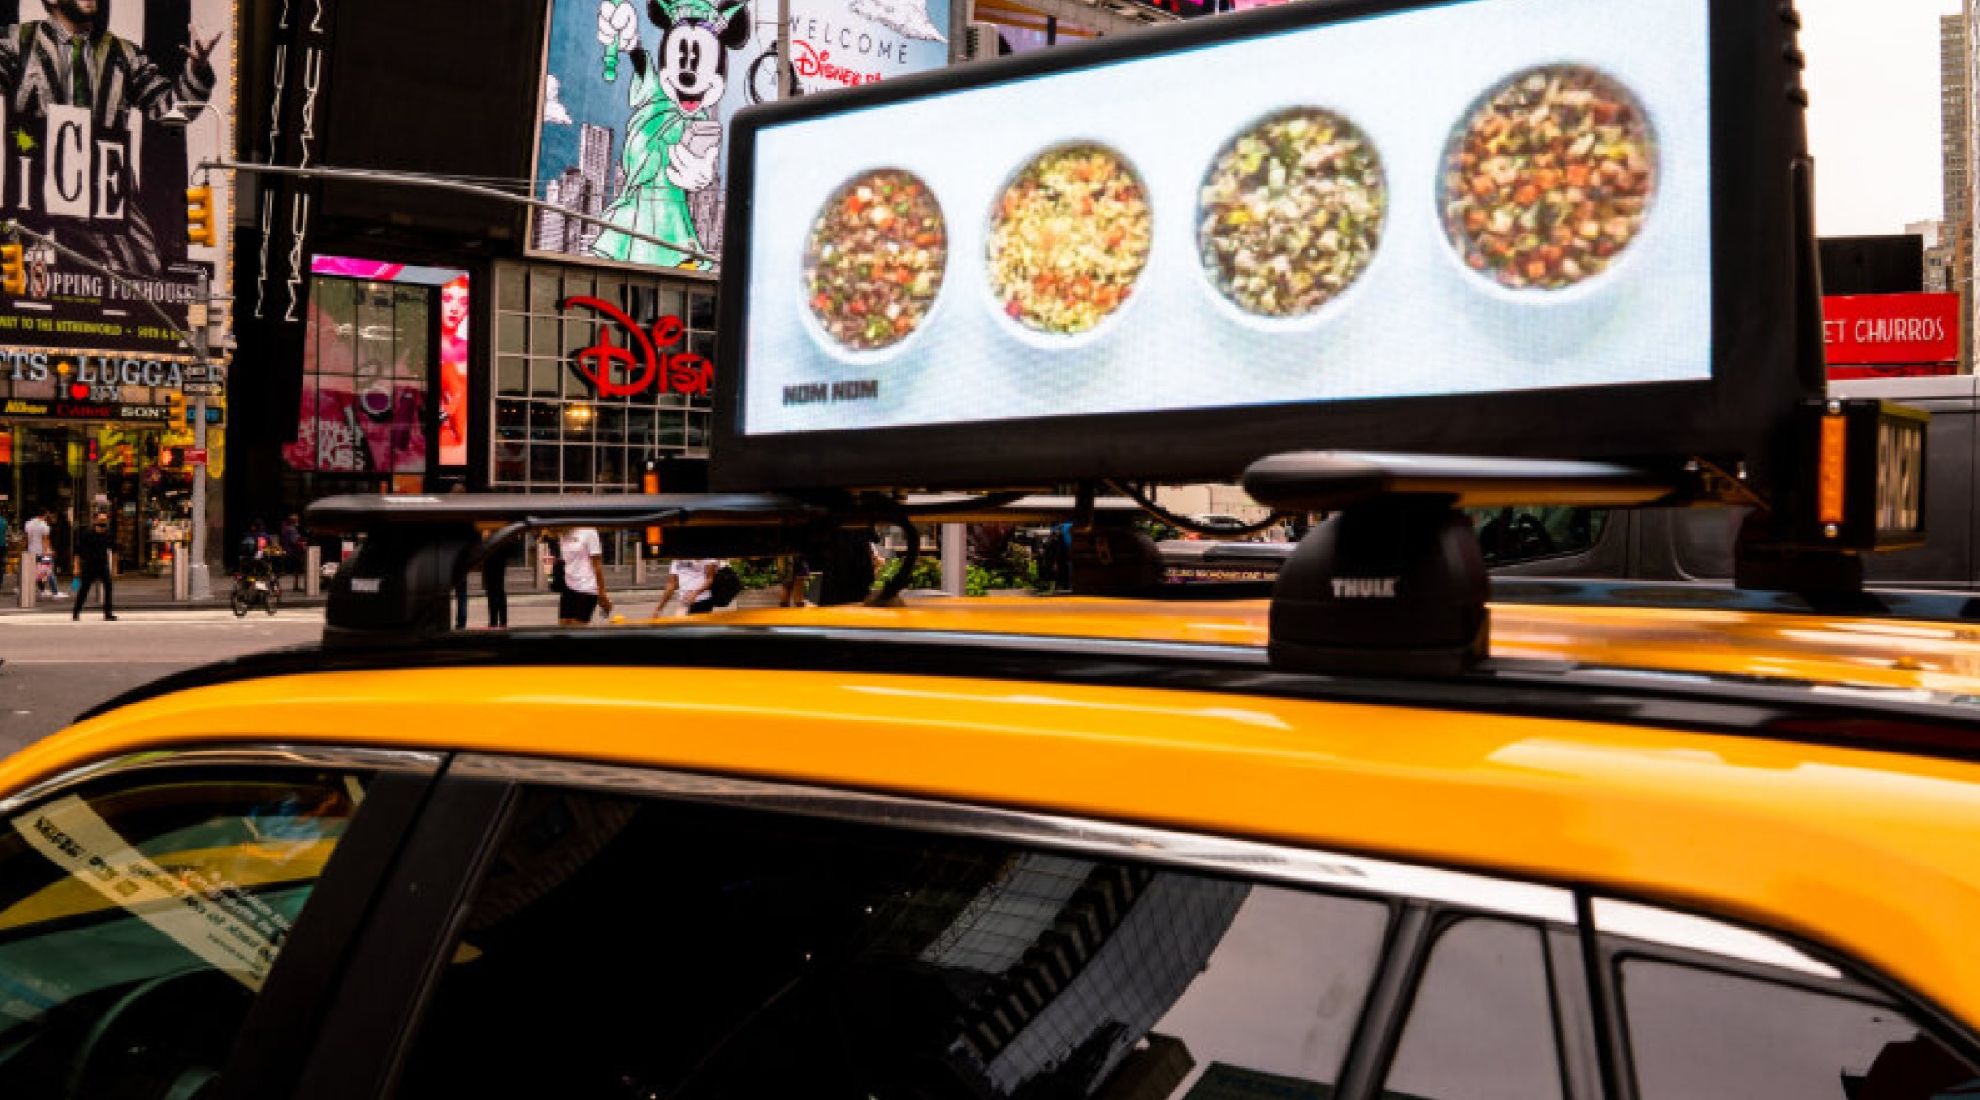 ride share vehicle with custom mounted digital advertising screen